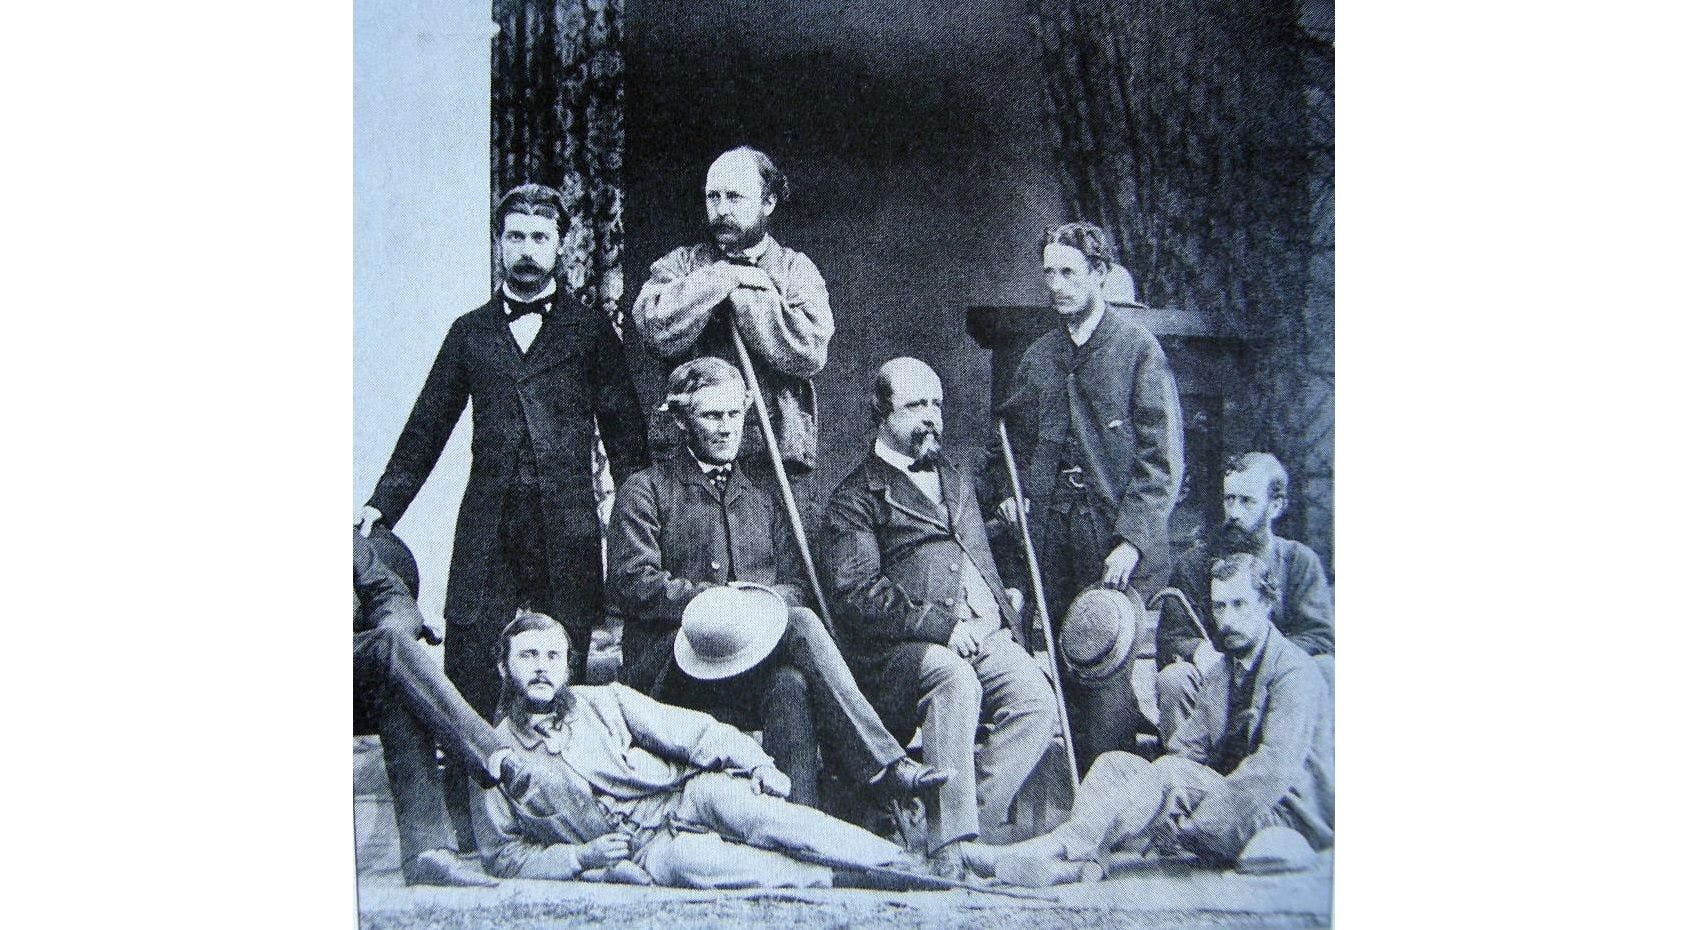 Cunningham with his colleagues during his early days